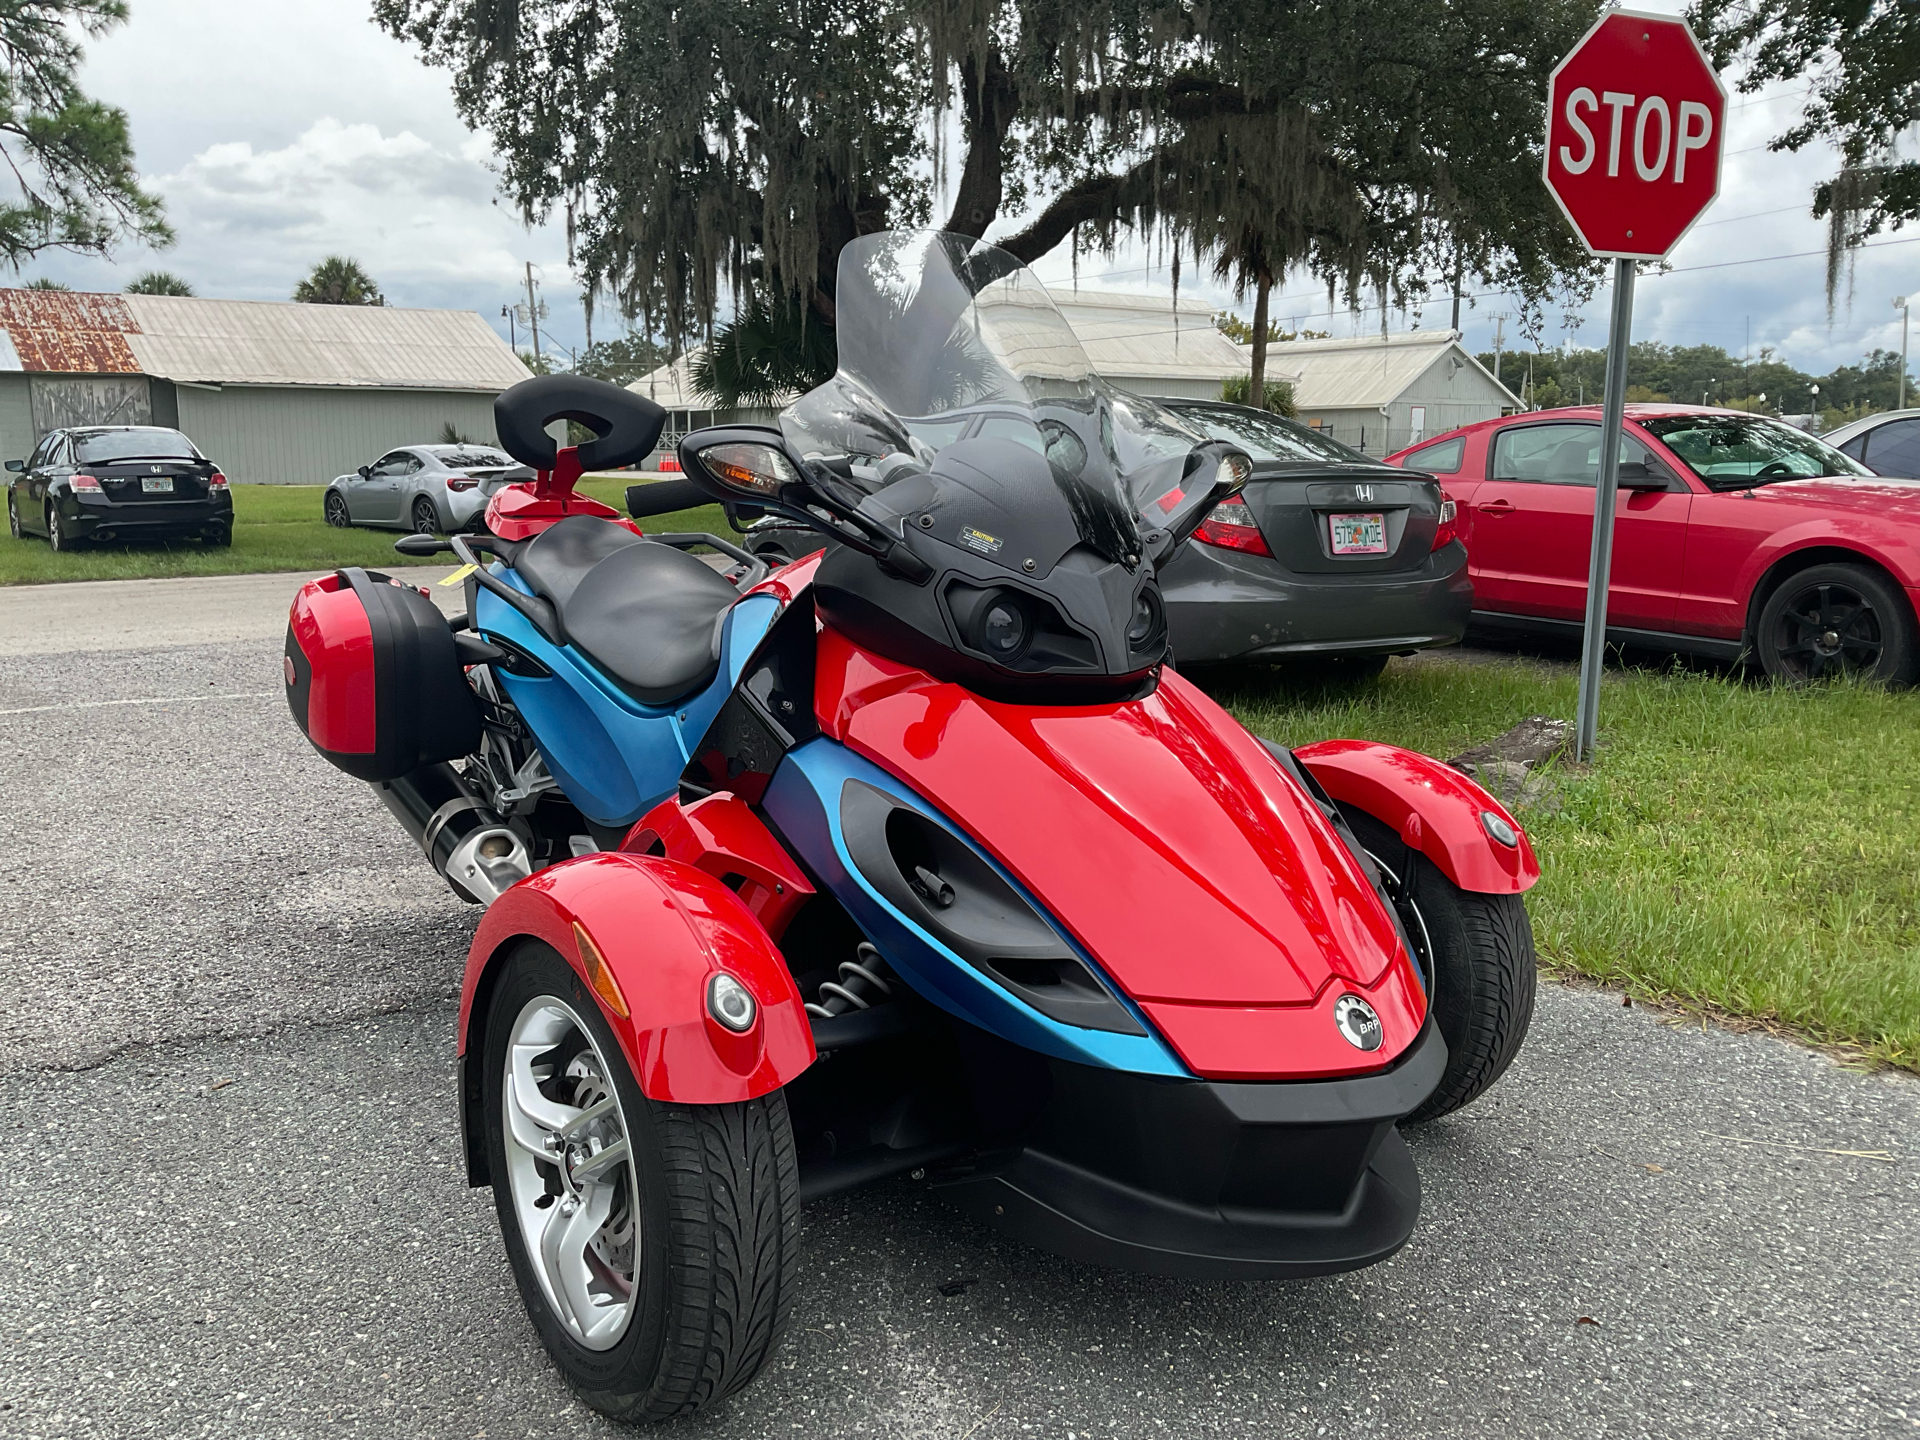 2010 Can-Am Spyder™ RS SE5 in Sanford, Florida - Photo 3